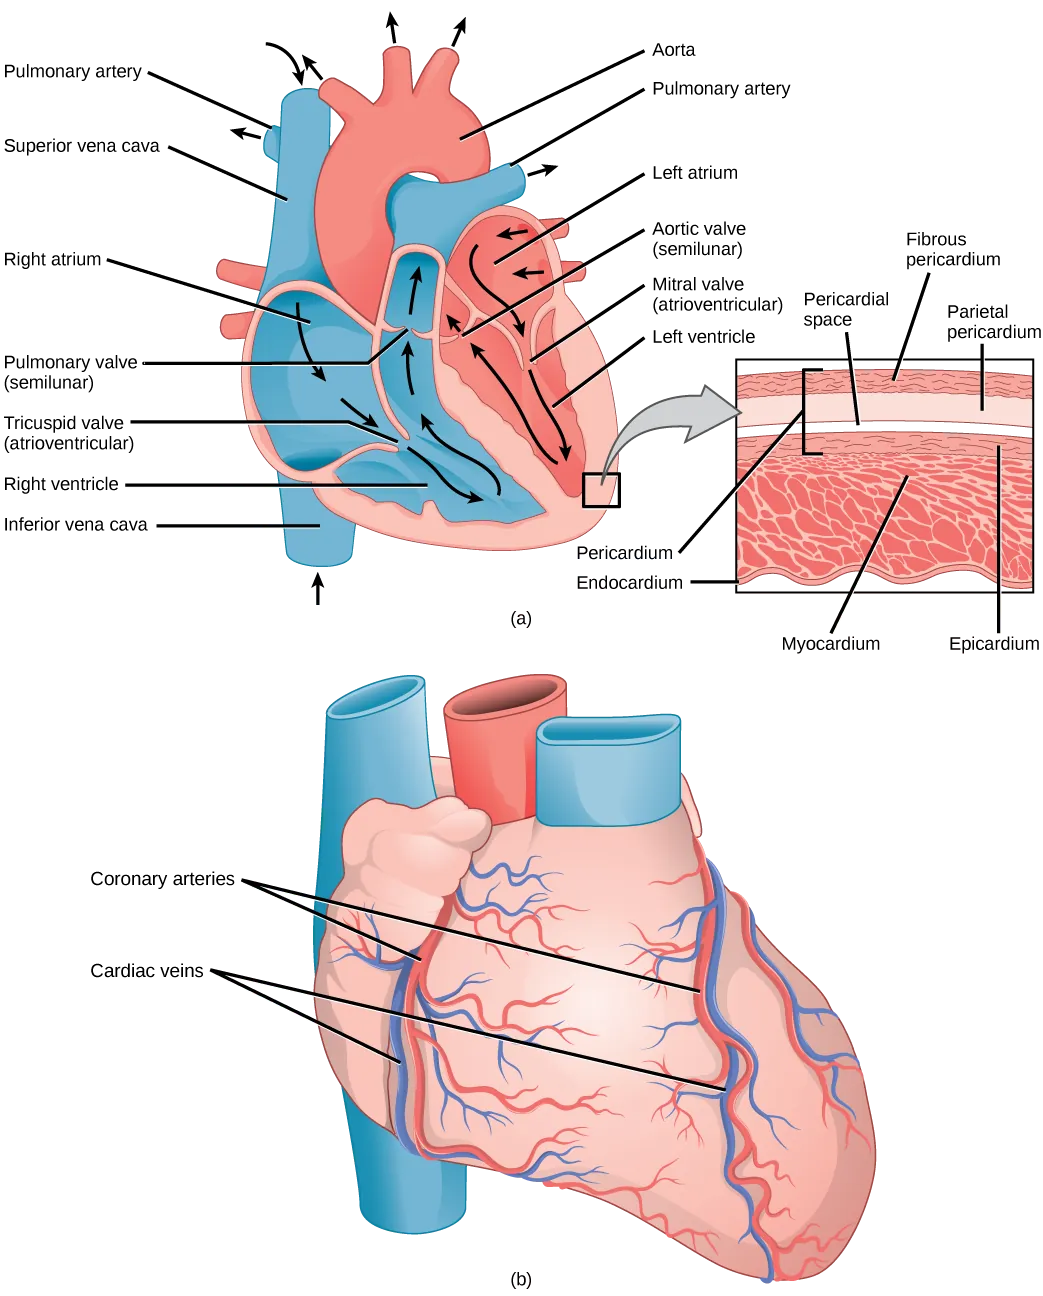 Illustration A shows the parts of the heart. Blood enters the right atrium through an upper, superior vena cava and a lower, inferior vena cava. From the right atrium, blood flows through the funnel-shaped tricuspid valve into the right ventricle. Blood then travels up and through the pulmonary valve into the pulmonary artery. Blood re-enters the heart through the pulmonary veins, and travels down from the left atrium, through the mitral valve, into the right ventricle. Blood then travels up through the aortic valve, into the aorta. The tricuspid and mitral valves are atrioventricular and funnel-shaped. The pulmonary and aortic valves are semilunar and slightly curved. An inset shows a cross section of the heart. The myocardium is the thick muscle layer. The inside of the heart is protected by the endocardium, and the outside is protected by the pericardium. Illustration B shows the outside of the heart. Coronary arteries and coronary veins run from the top down along the right and left sides.